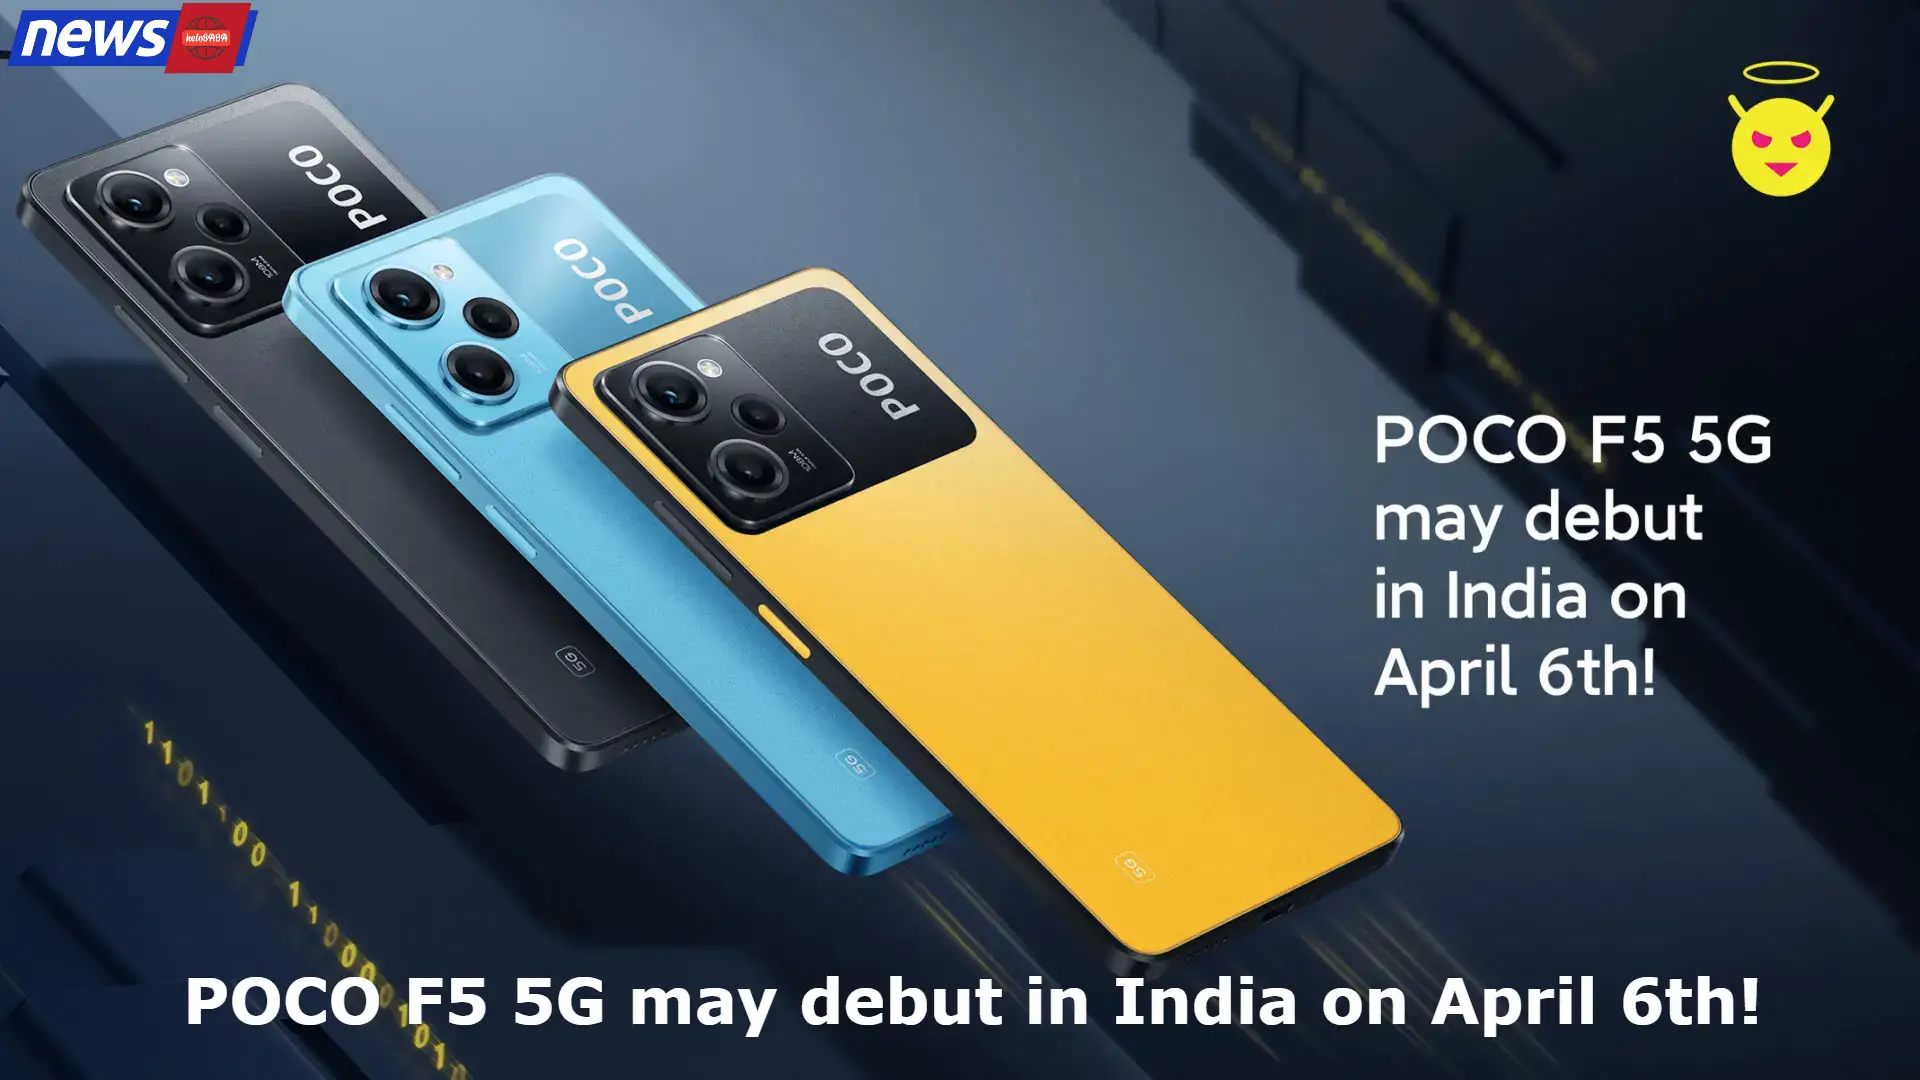 POCO F5 5G may debut in India on April 6th!